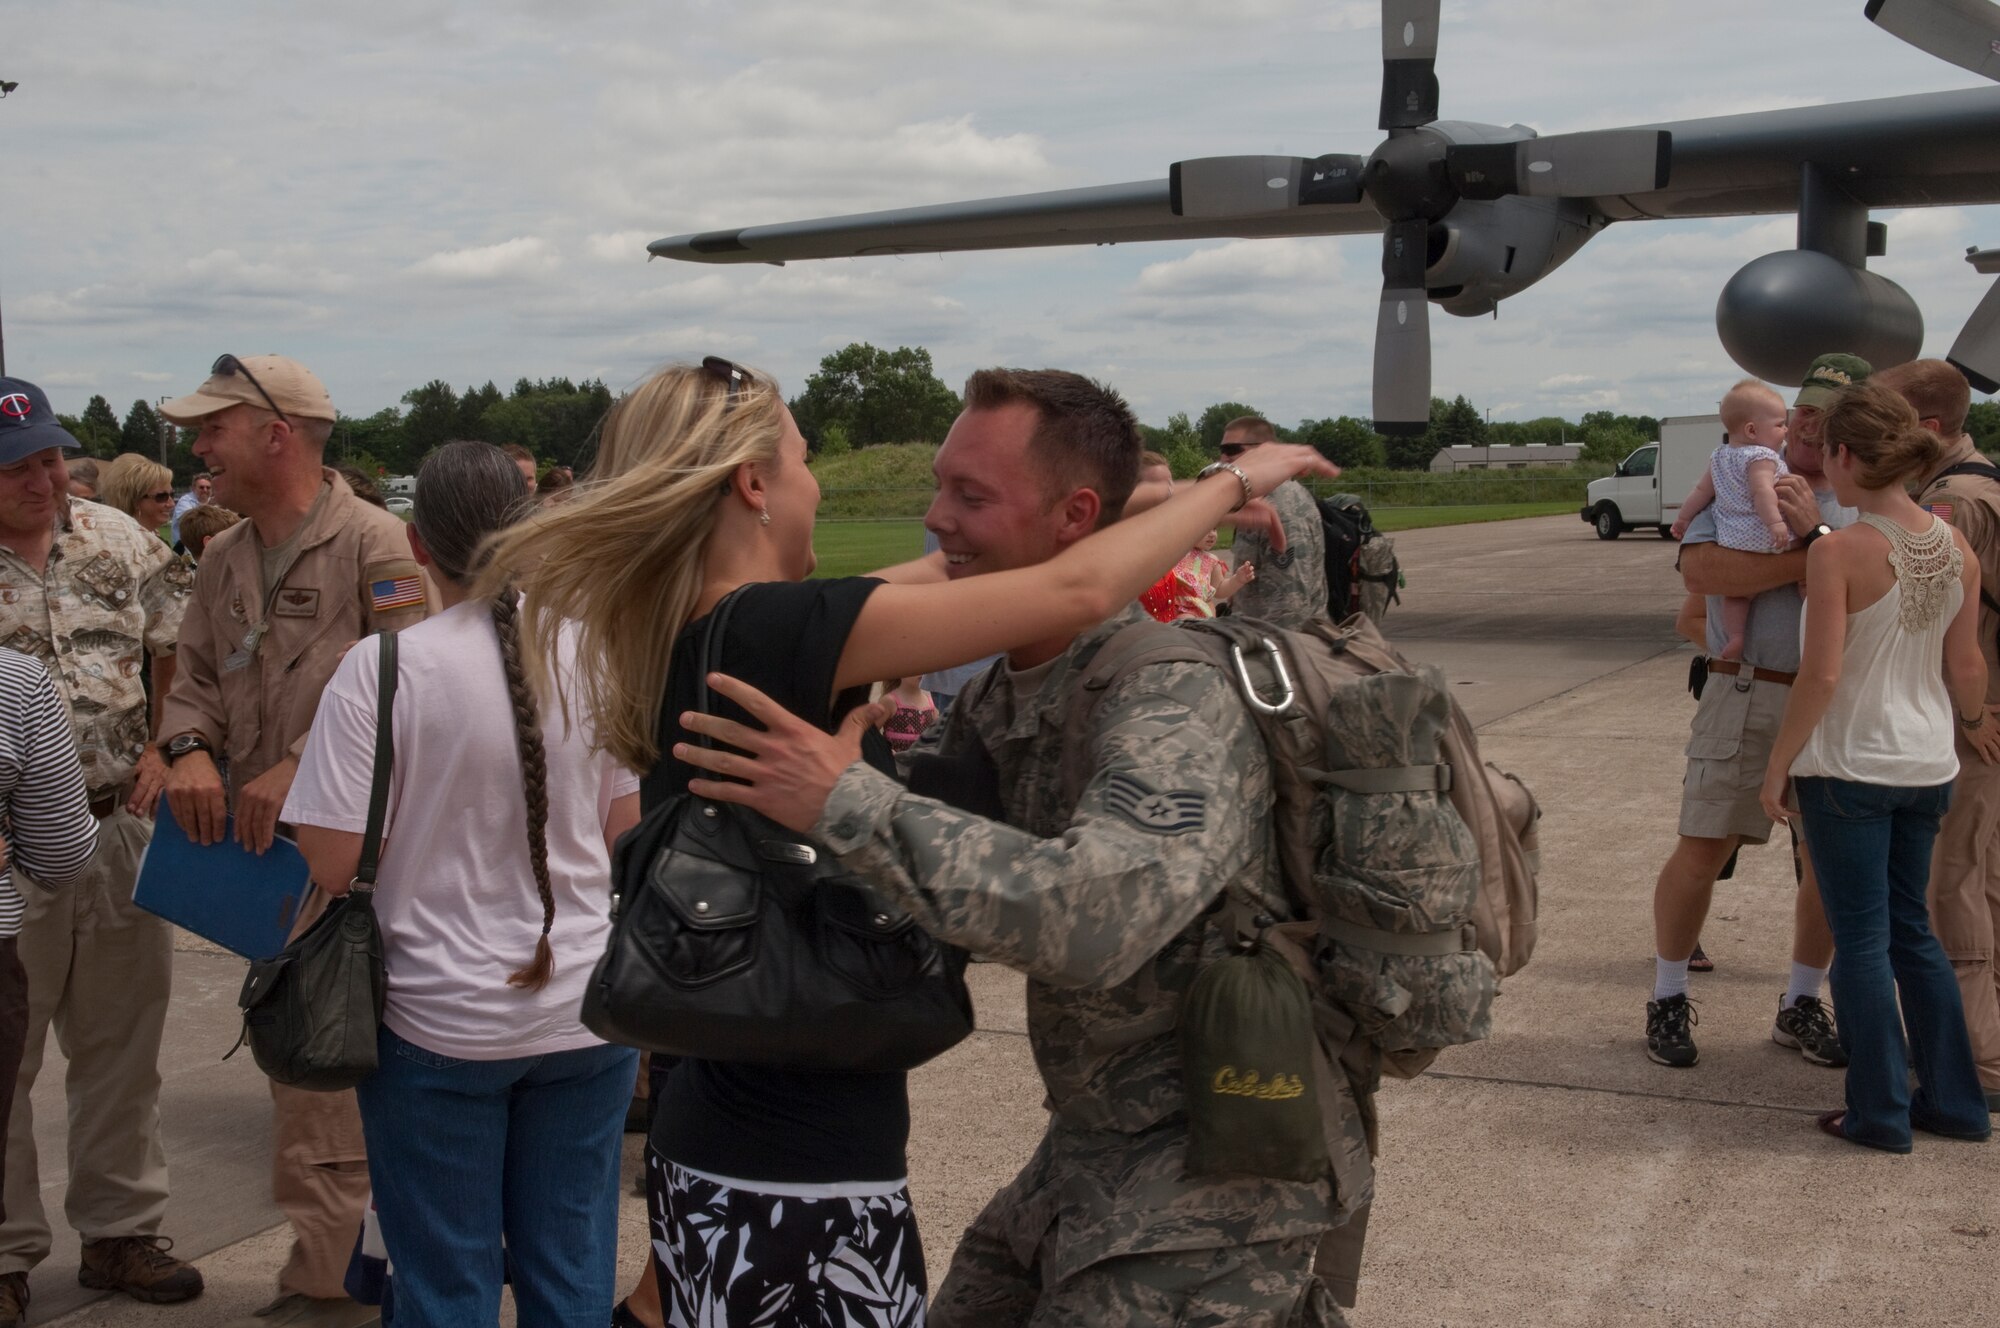 Friends and family excitedly greet Airmen disembarking from a C-130 "Hercules" at the Minneapolis-St. Paul International airport on July 11, 2010. The military cargo aircraft and about twenty Airmen are the first in a series of returns from Afghanistan during July for the 133rd Airlift Wing in 2010. USAF official photo by Senior Master Sgt. Mark Moss